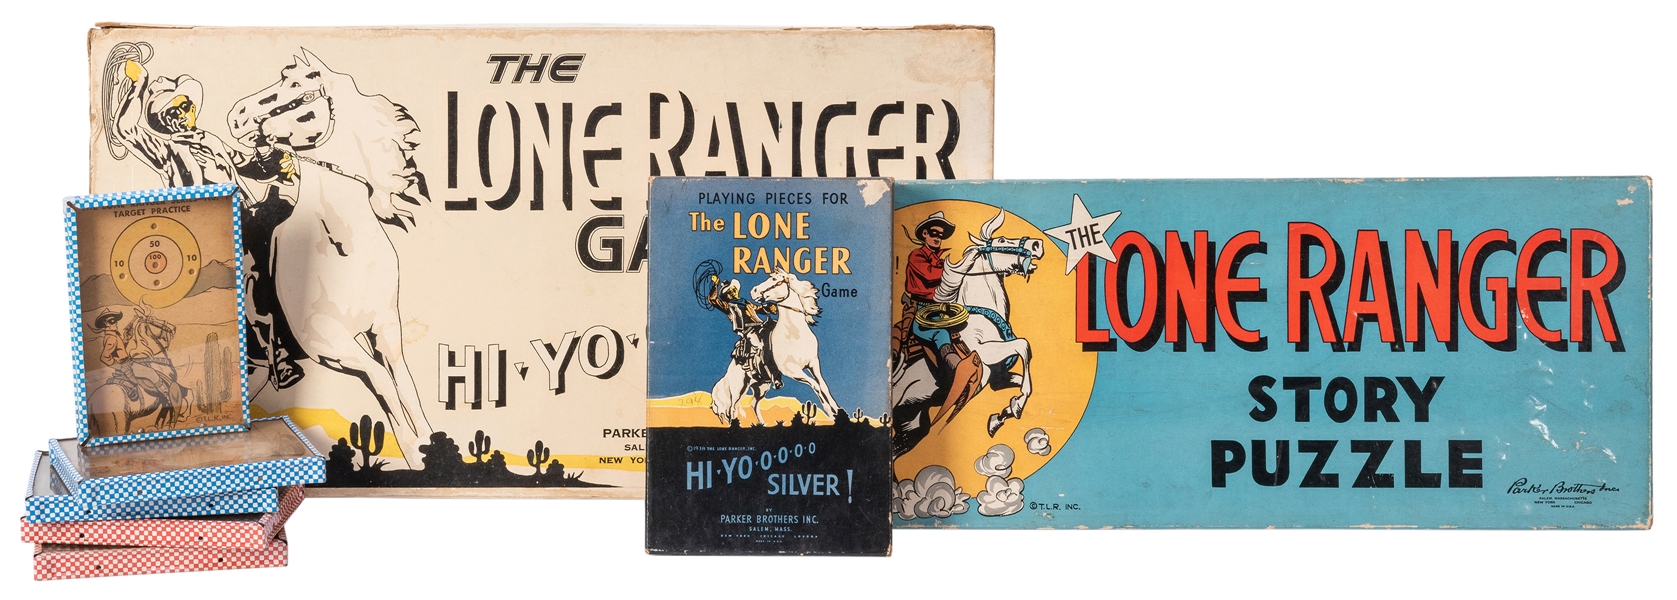  Collection of Lone Ranger Games, Puzzles, and Premium. 9pcs.  